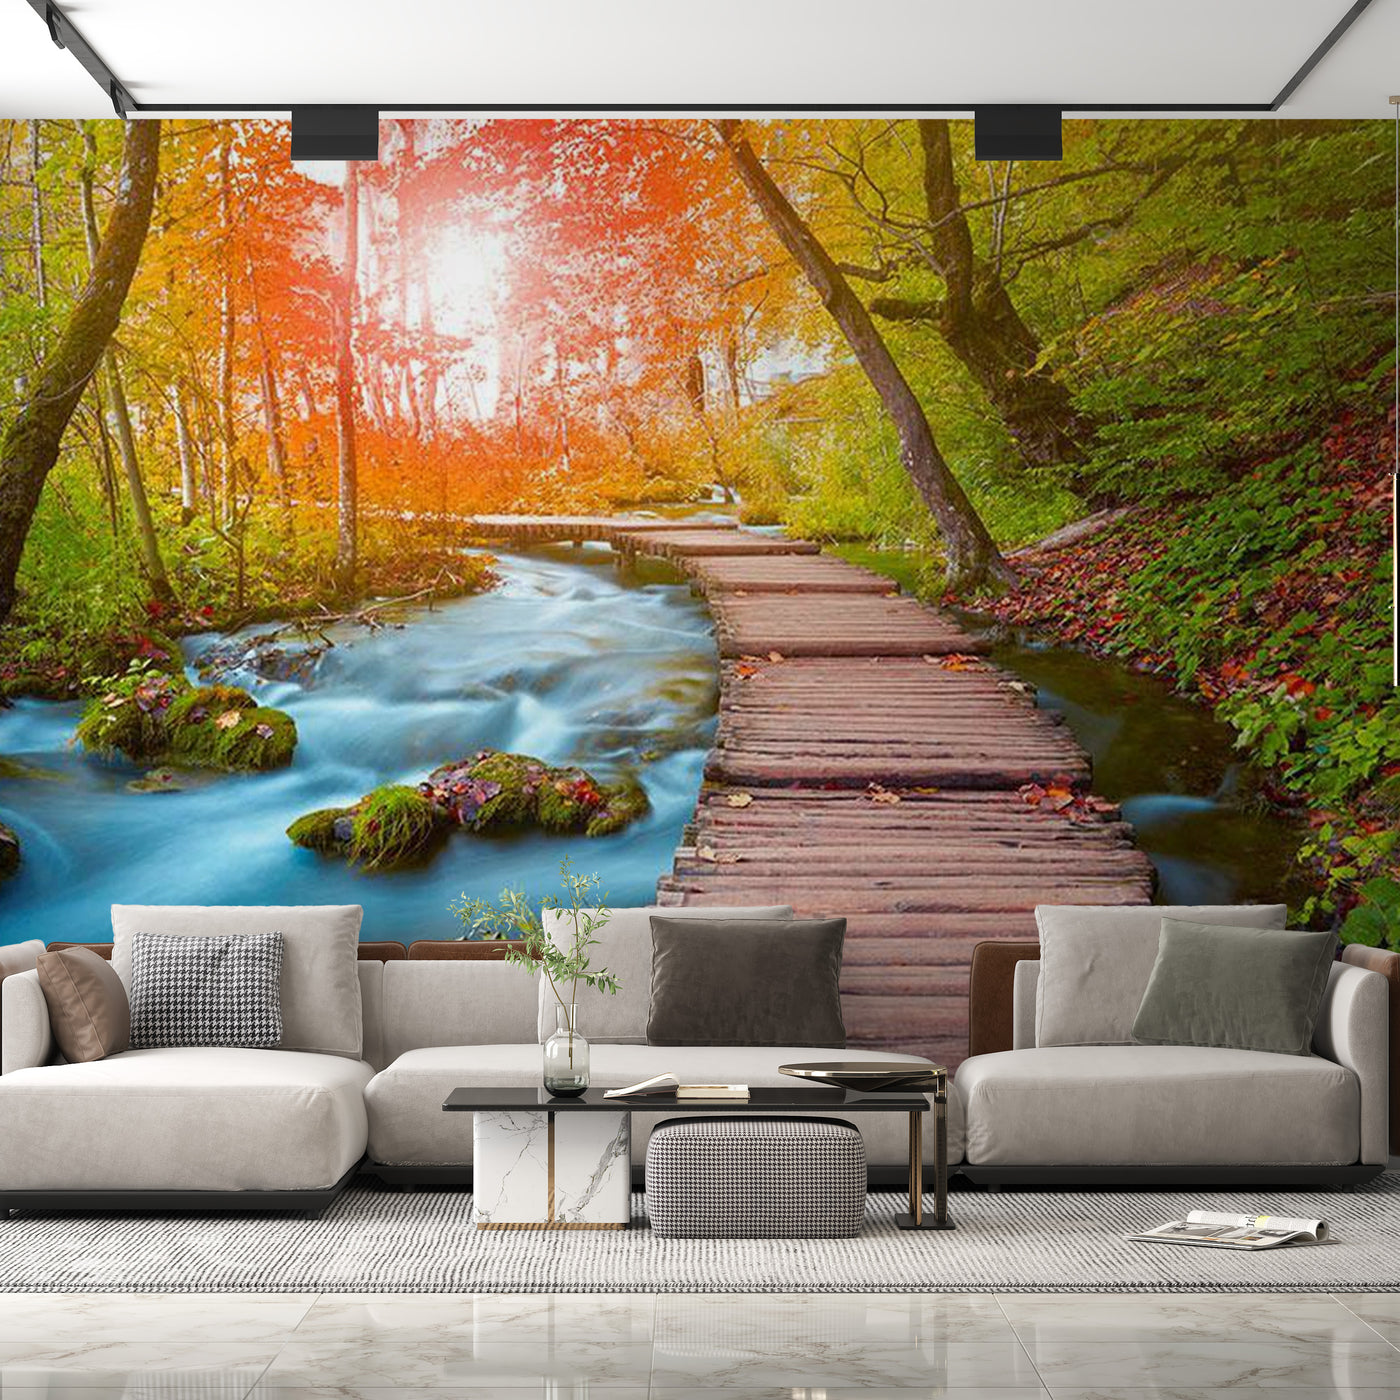 Peel & Stick Forest Wall Mural - Oasis Of Peace - Removable Wall Decals